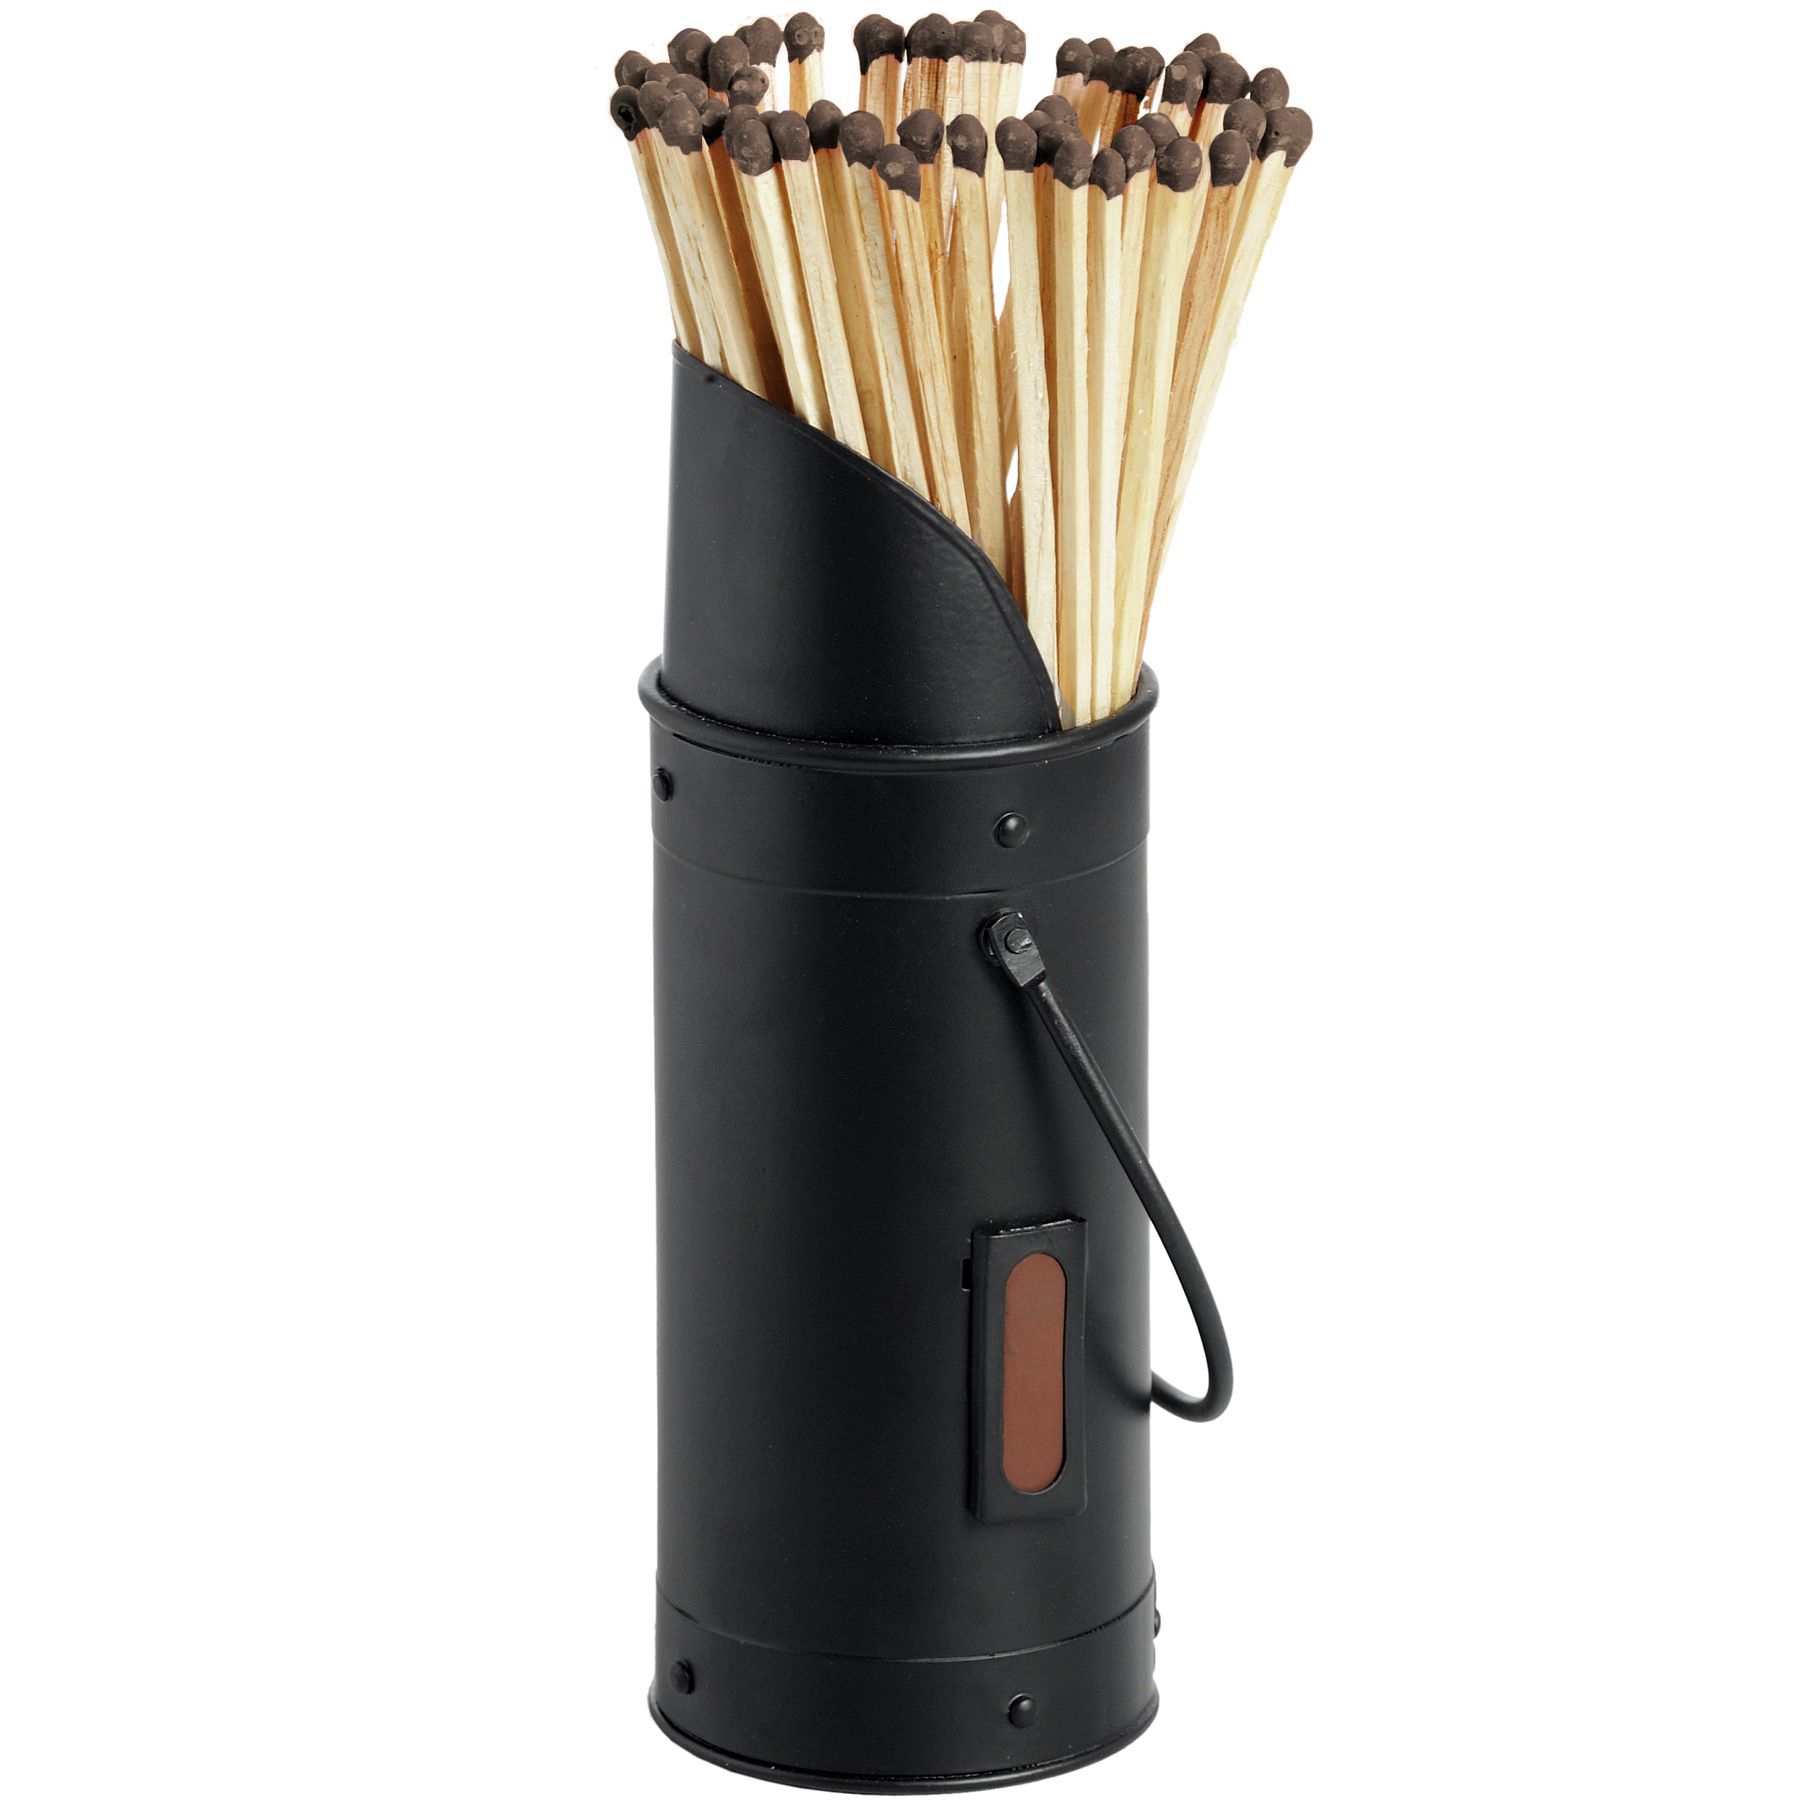 Black Matchstick Holder with 60 Matches - Image 1